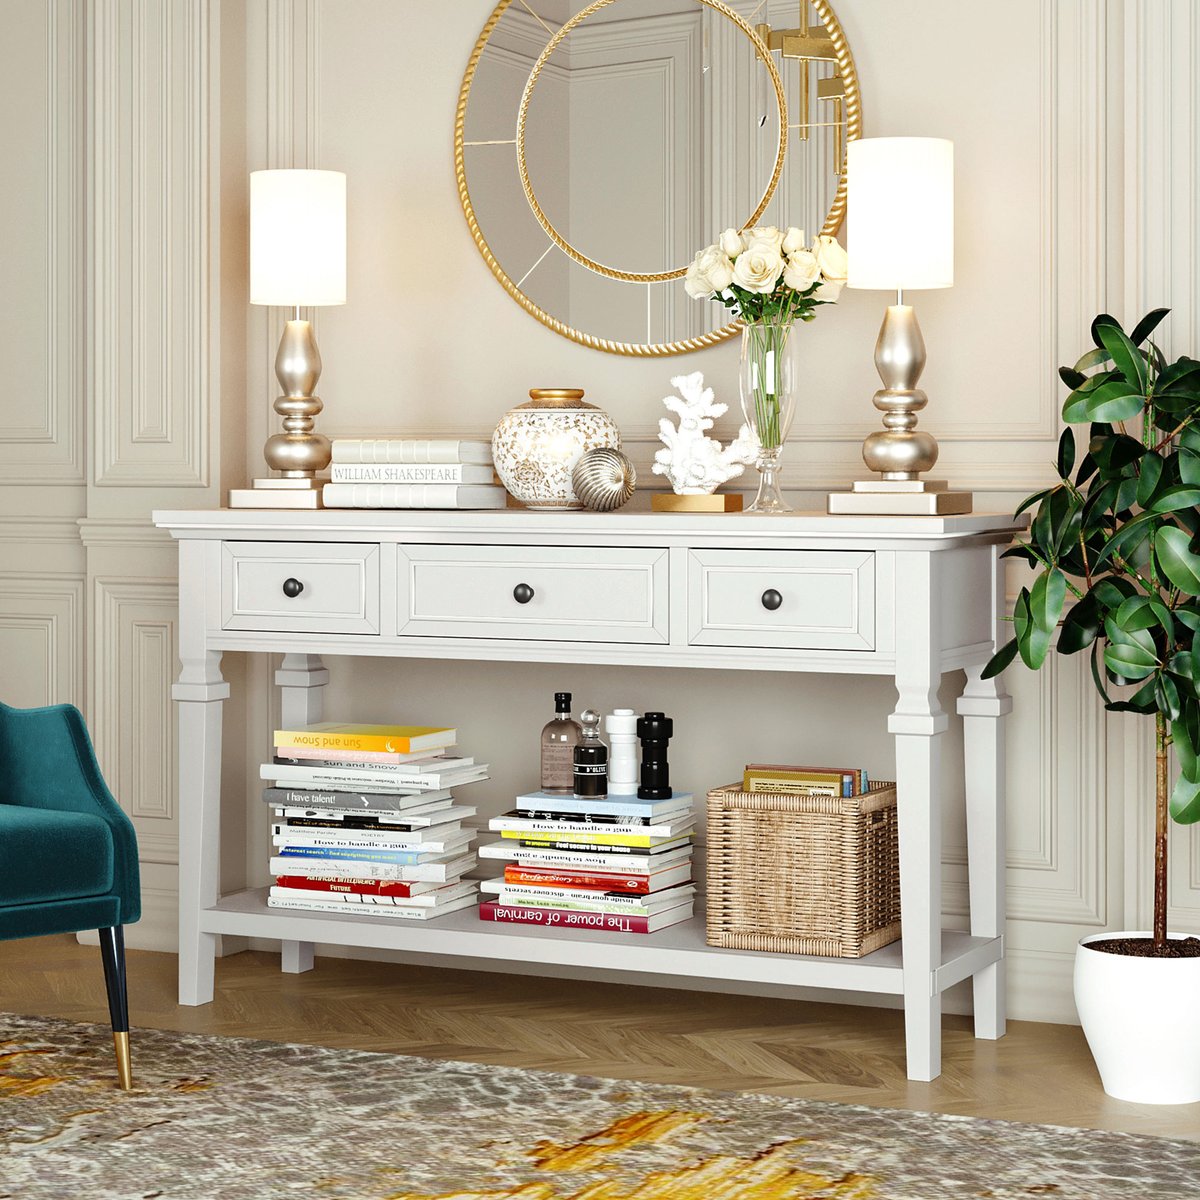 Swing into Spring with Our Exclusive Decor!
TREXM Classic Retro Style Console Table with Three Top Drawers and Open Style Bottom Shelf

lilliesoutdoordecor.com

Tap our LINK to shop.
#porchdecor #summer #landscapedesign #weddingdecor #gardeninspiration #backyardliving #gardening